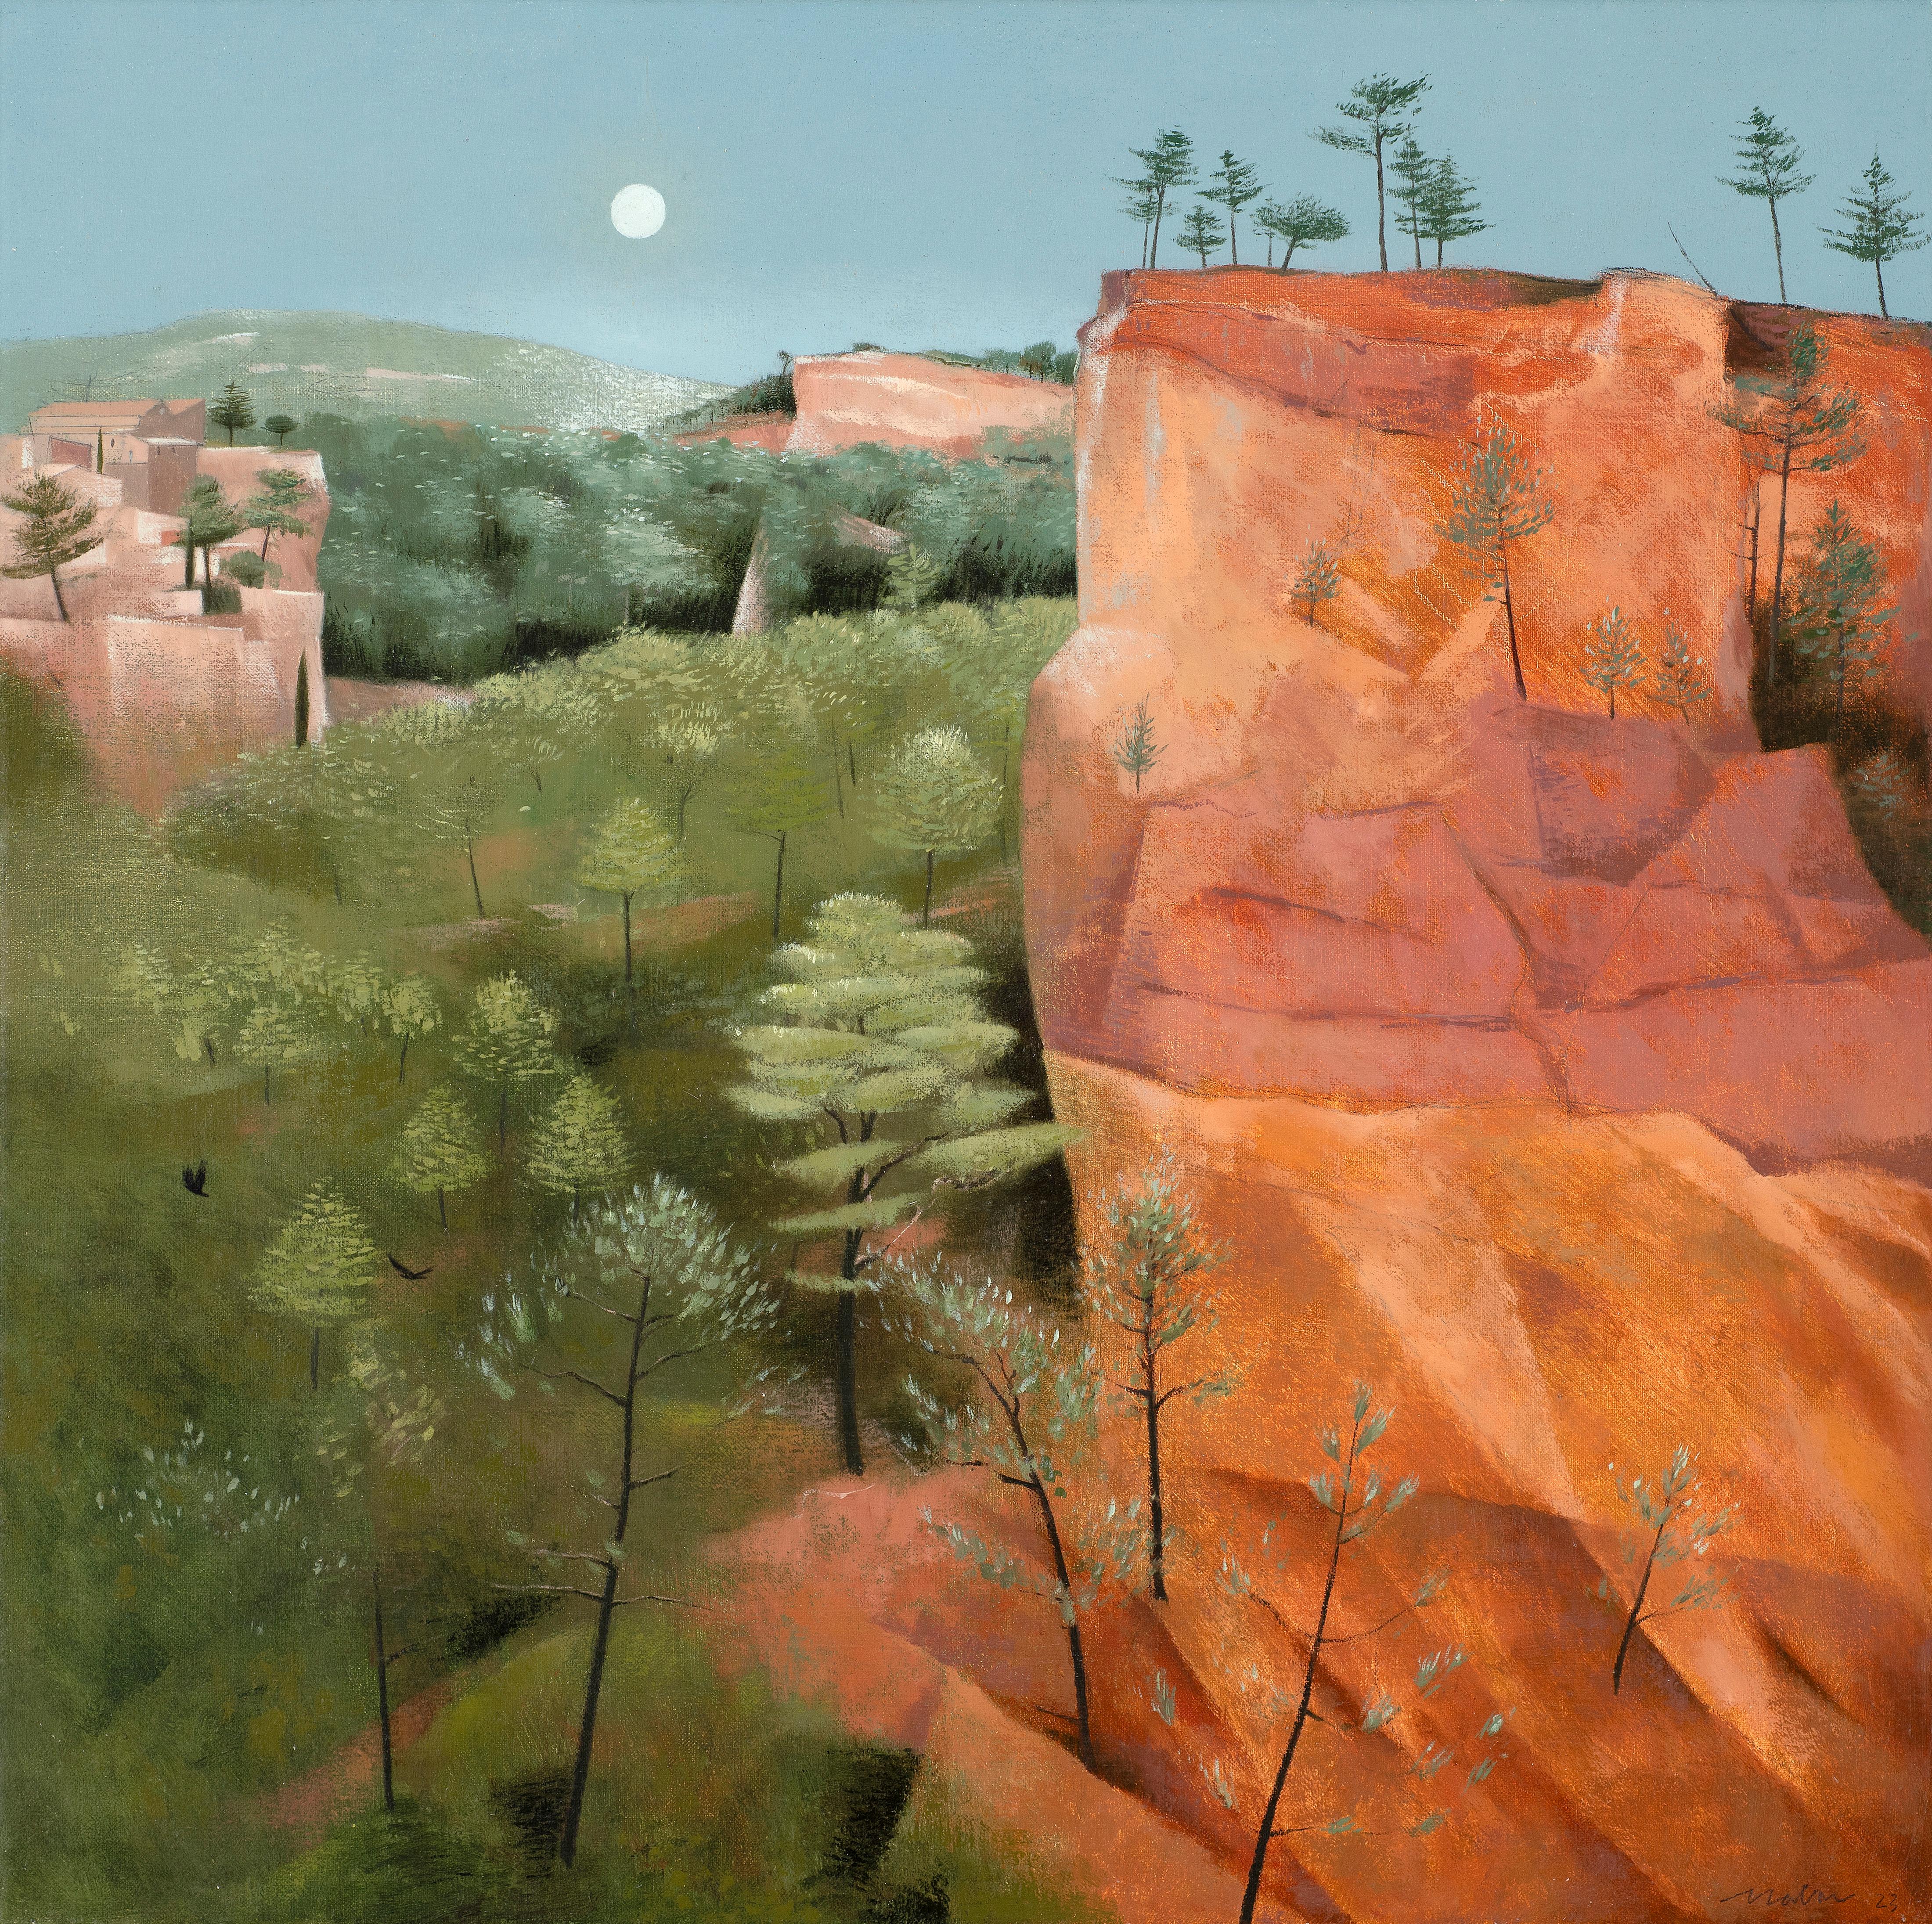 Tom Mabon Figurative Painting - FULL MOON OVER ROUSSILLON